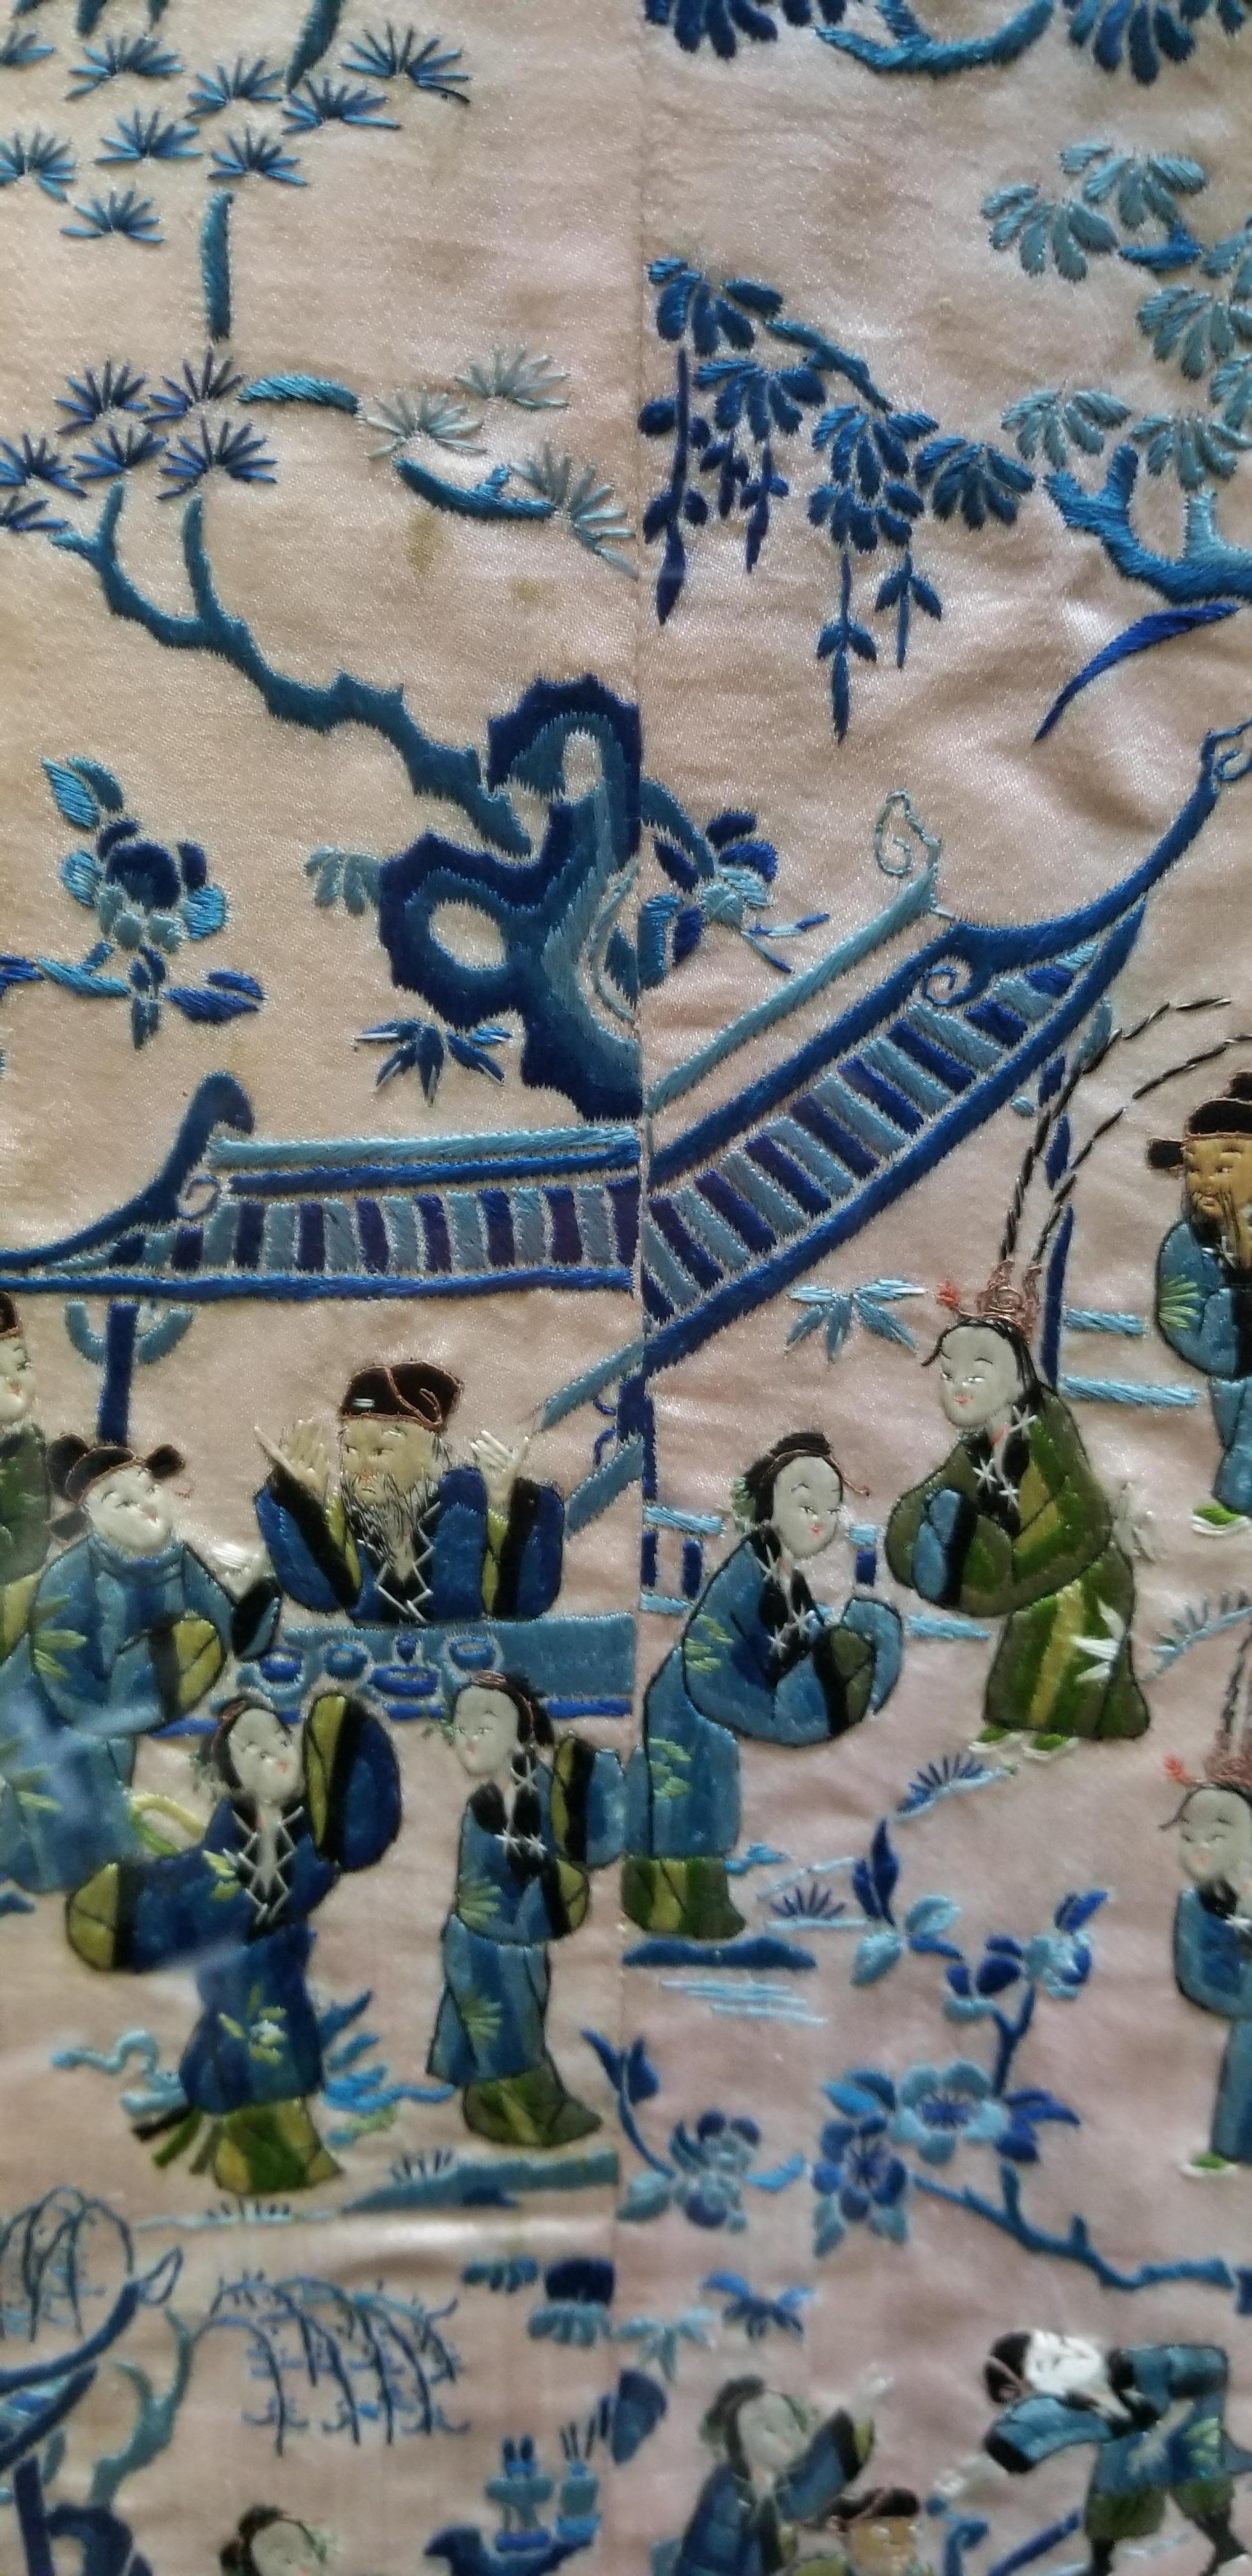 Antique hand embroidered Chinese silk robe sleeve bands professionally framed under plexiglass in a black lacquer wood frame. Depicting male and female figures, pagoda, flora and trees. Primary colors cobalt blue, light blue, green, beige and black.